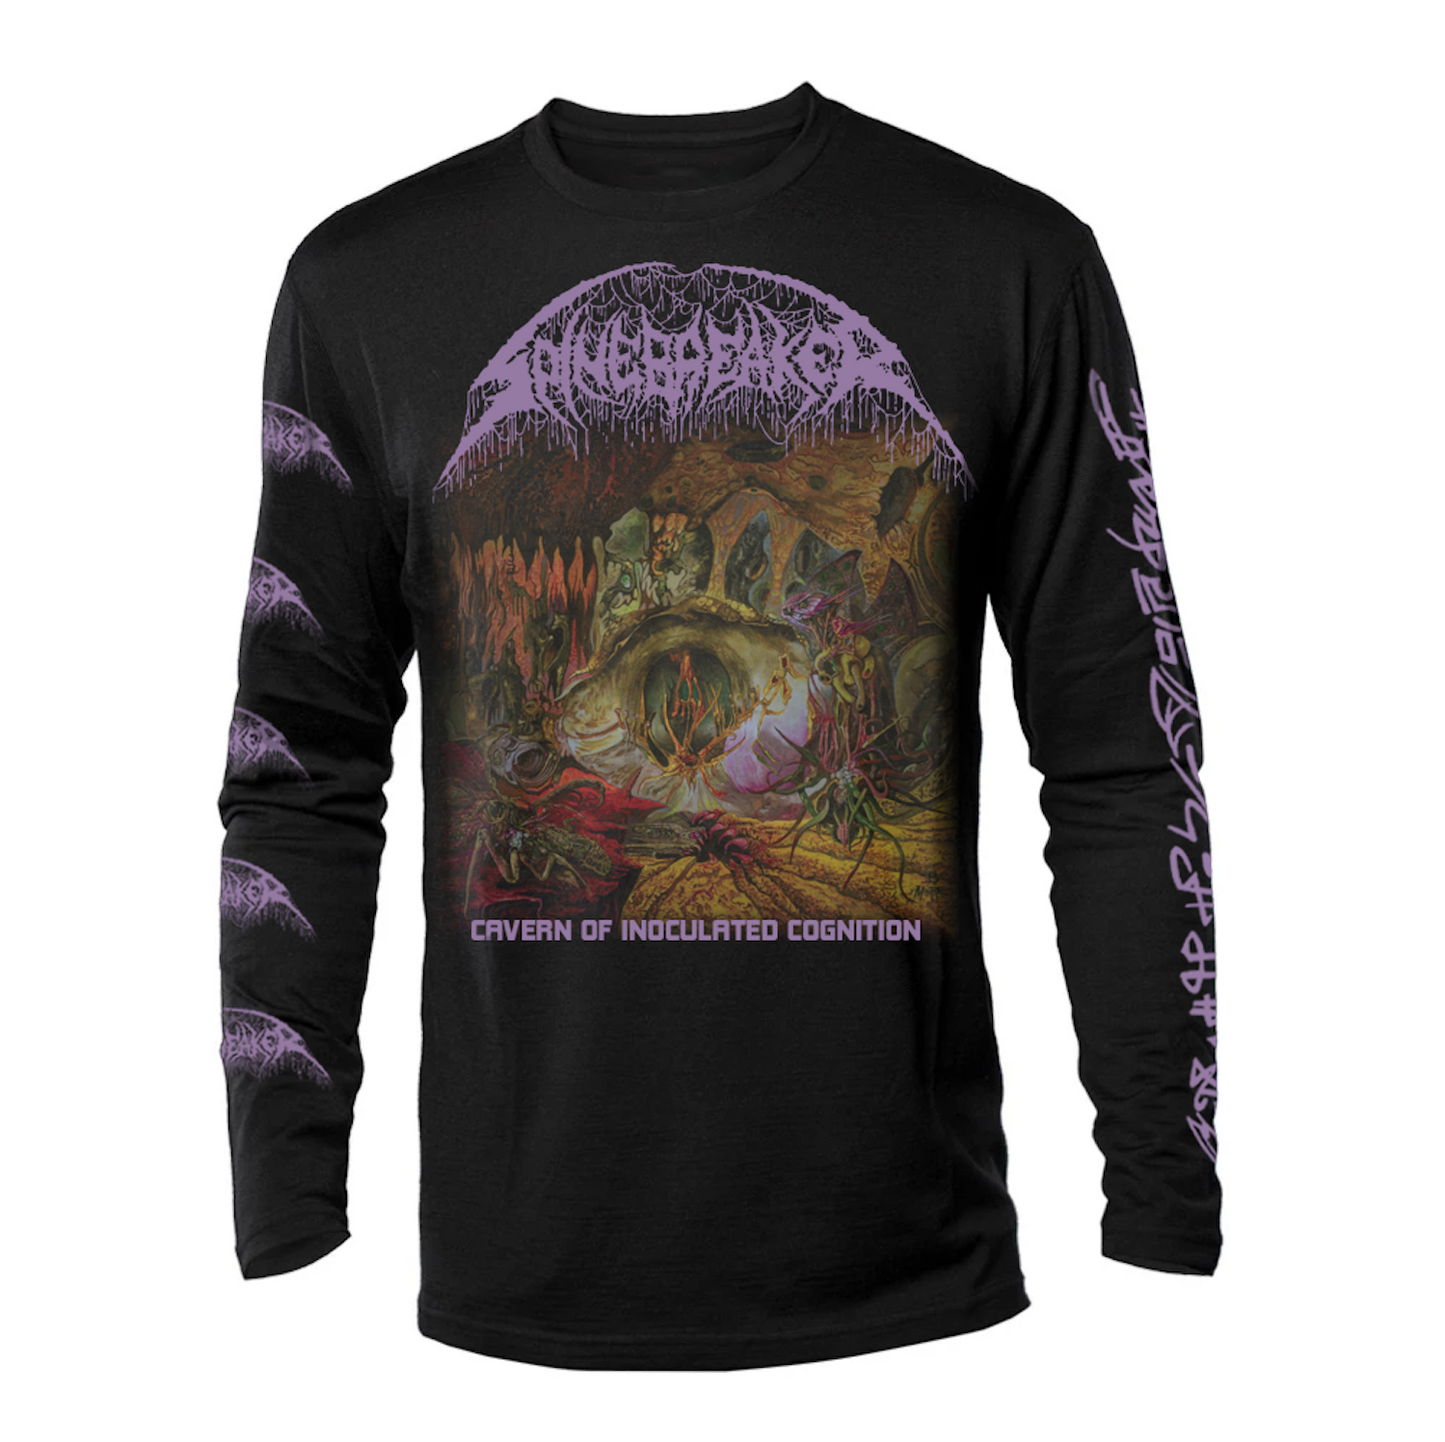 PREORDER:  Spinebreaker "Cavern of Inoculated Cognition" 4 Sided Longsleeve